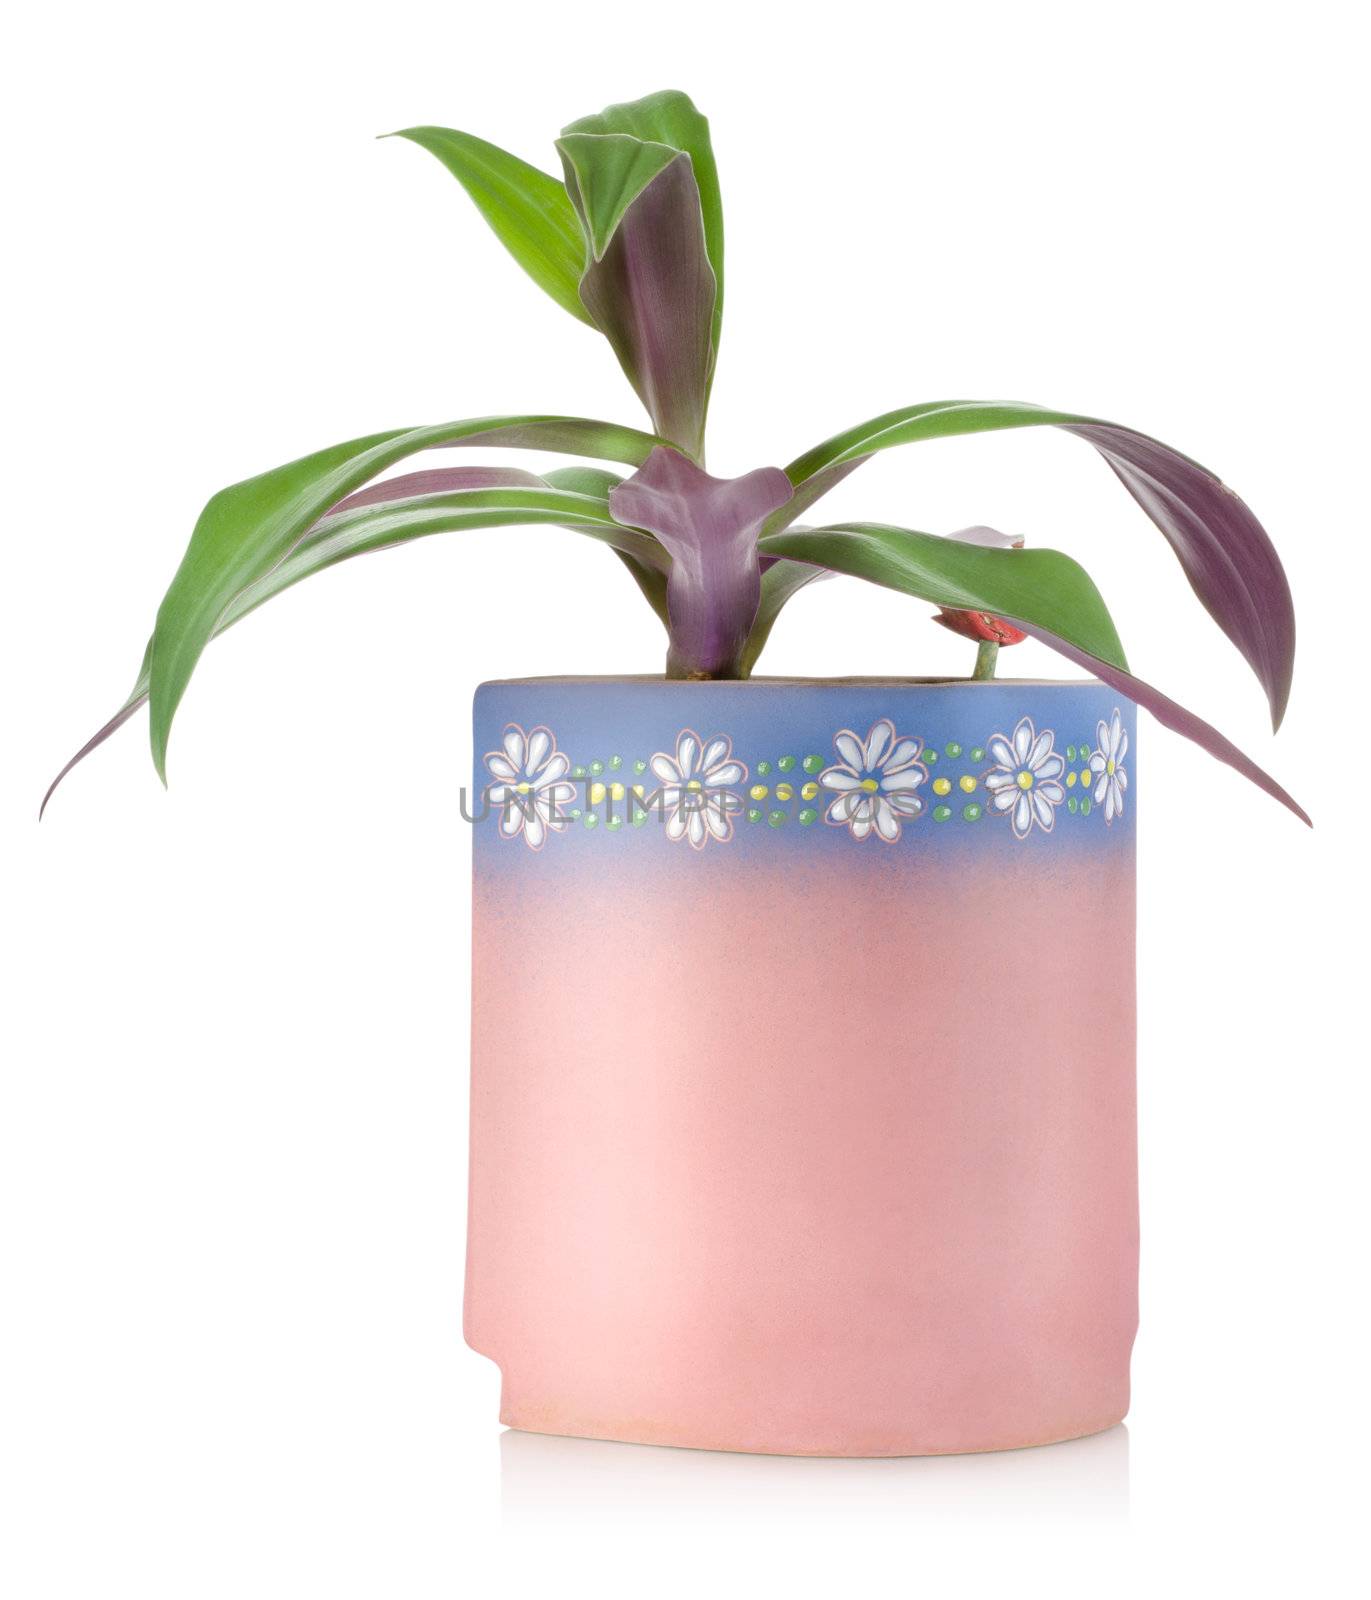 Flower in a ceramic pot by Givaga